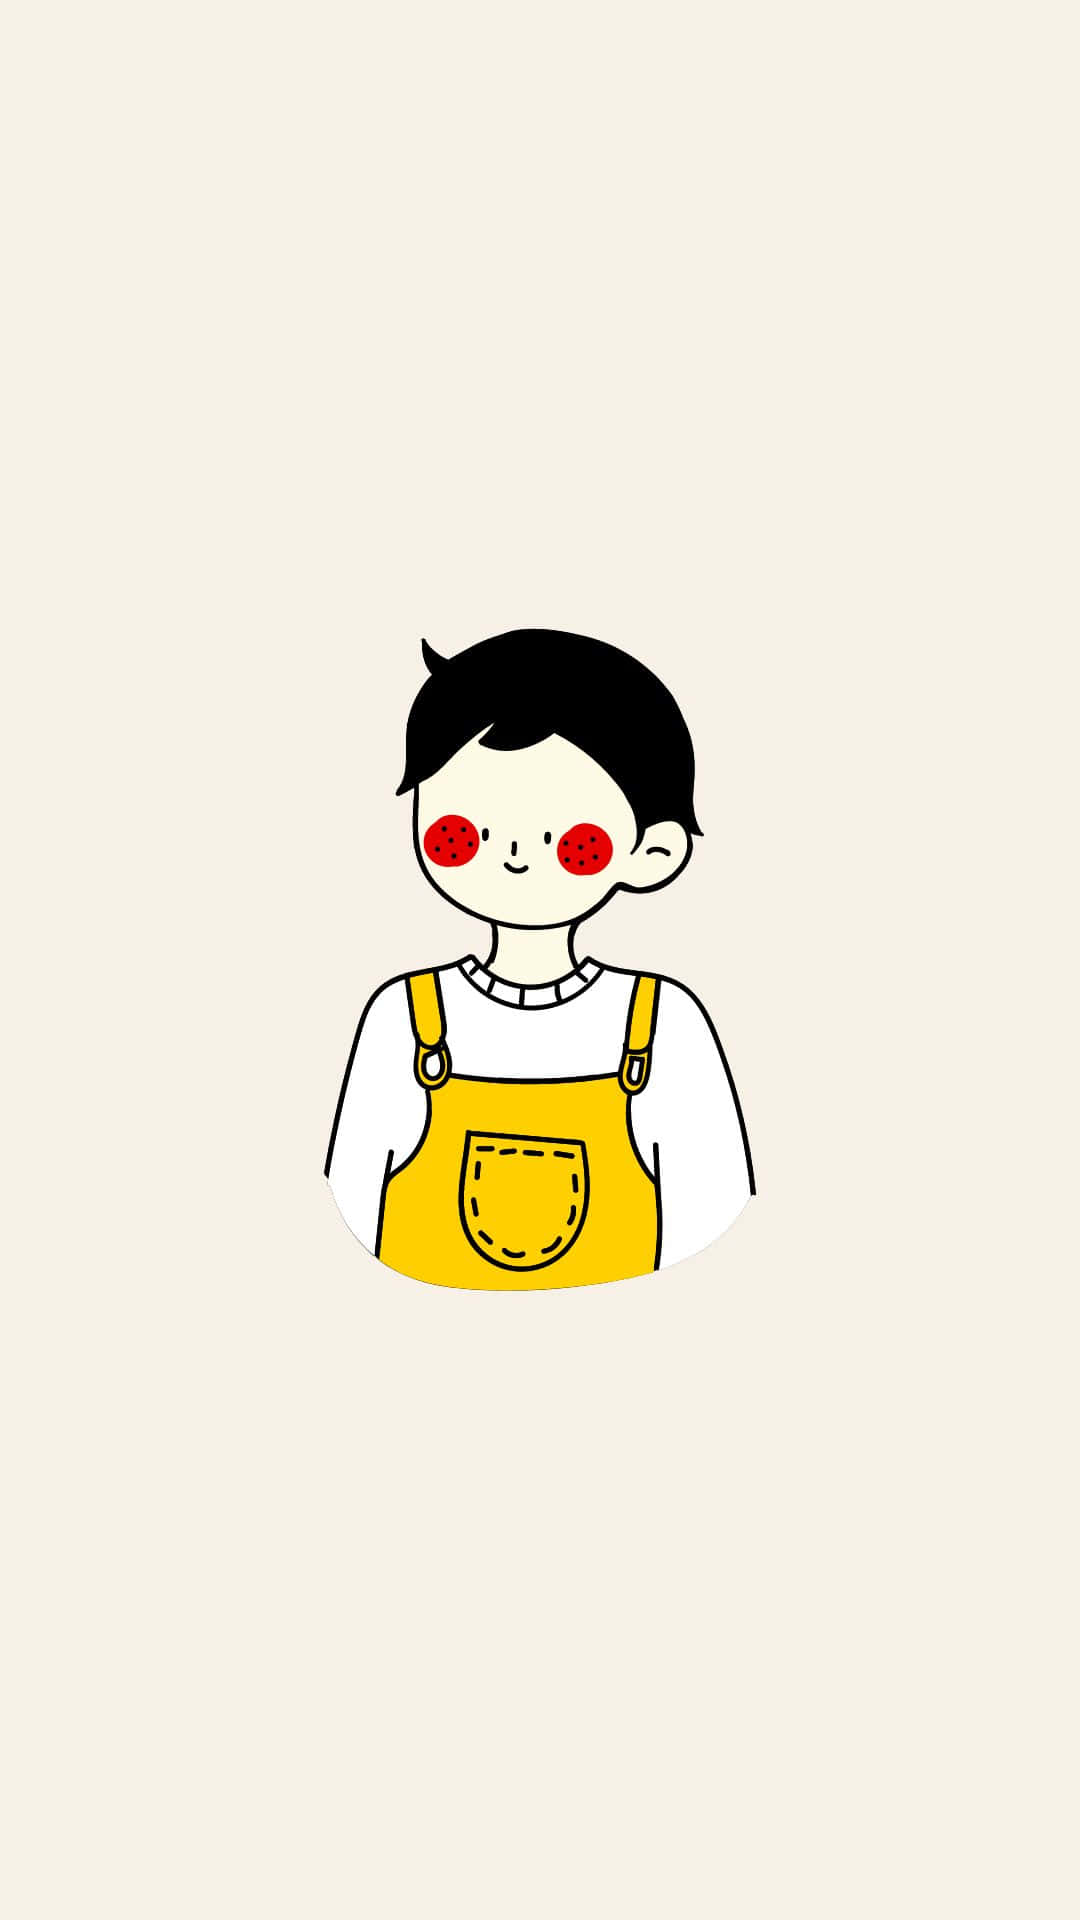 Cool And Stylish Boy Cartoon in Yellow Jumper Wallpaper